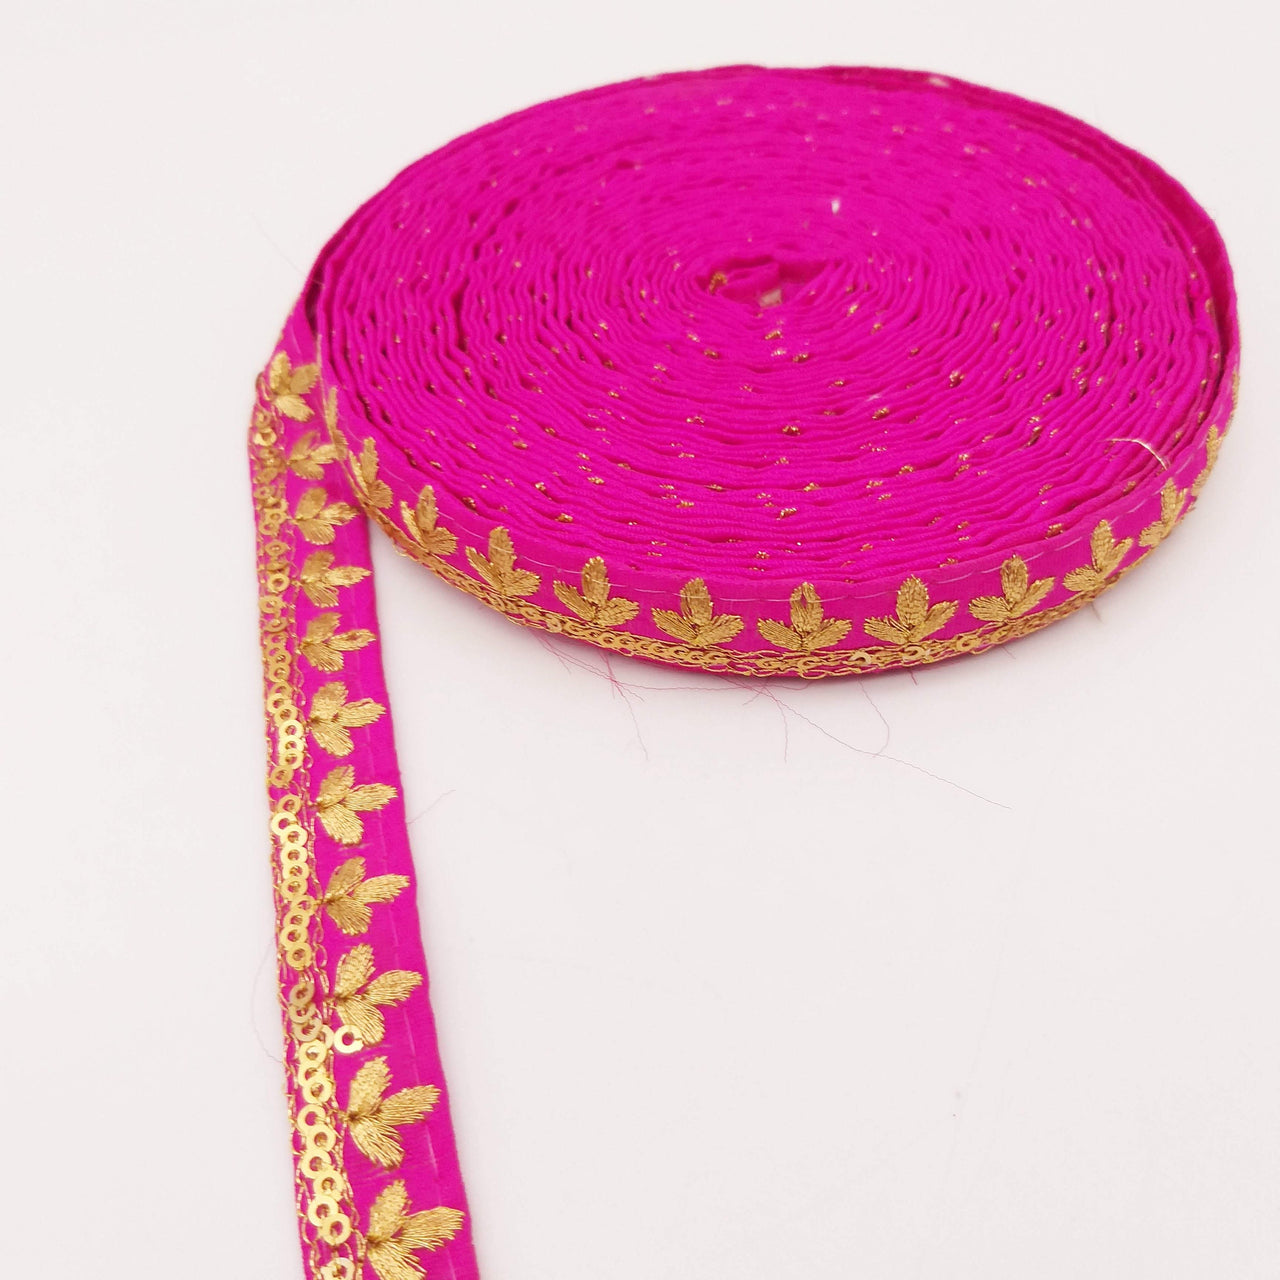 Fuchsia Pink Art Silk Trim with Gold Floral Embroidery and Gold Sequins Indian Sari Border Trim By 3 Yards Decorative Trim Craft Lace